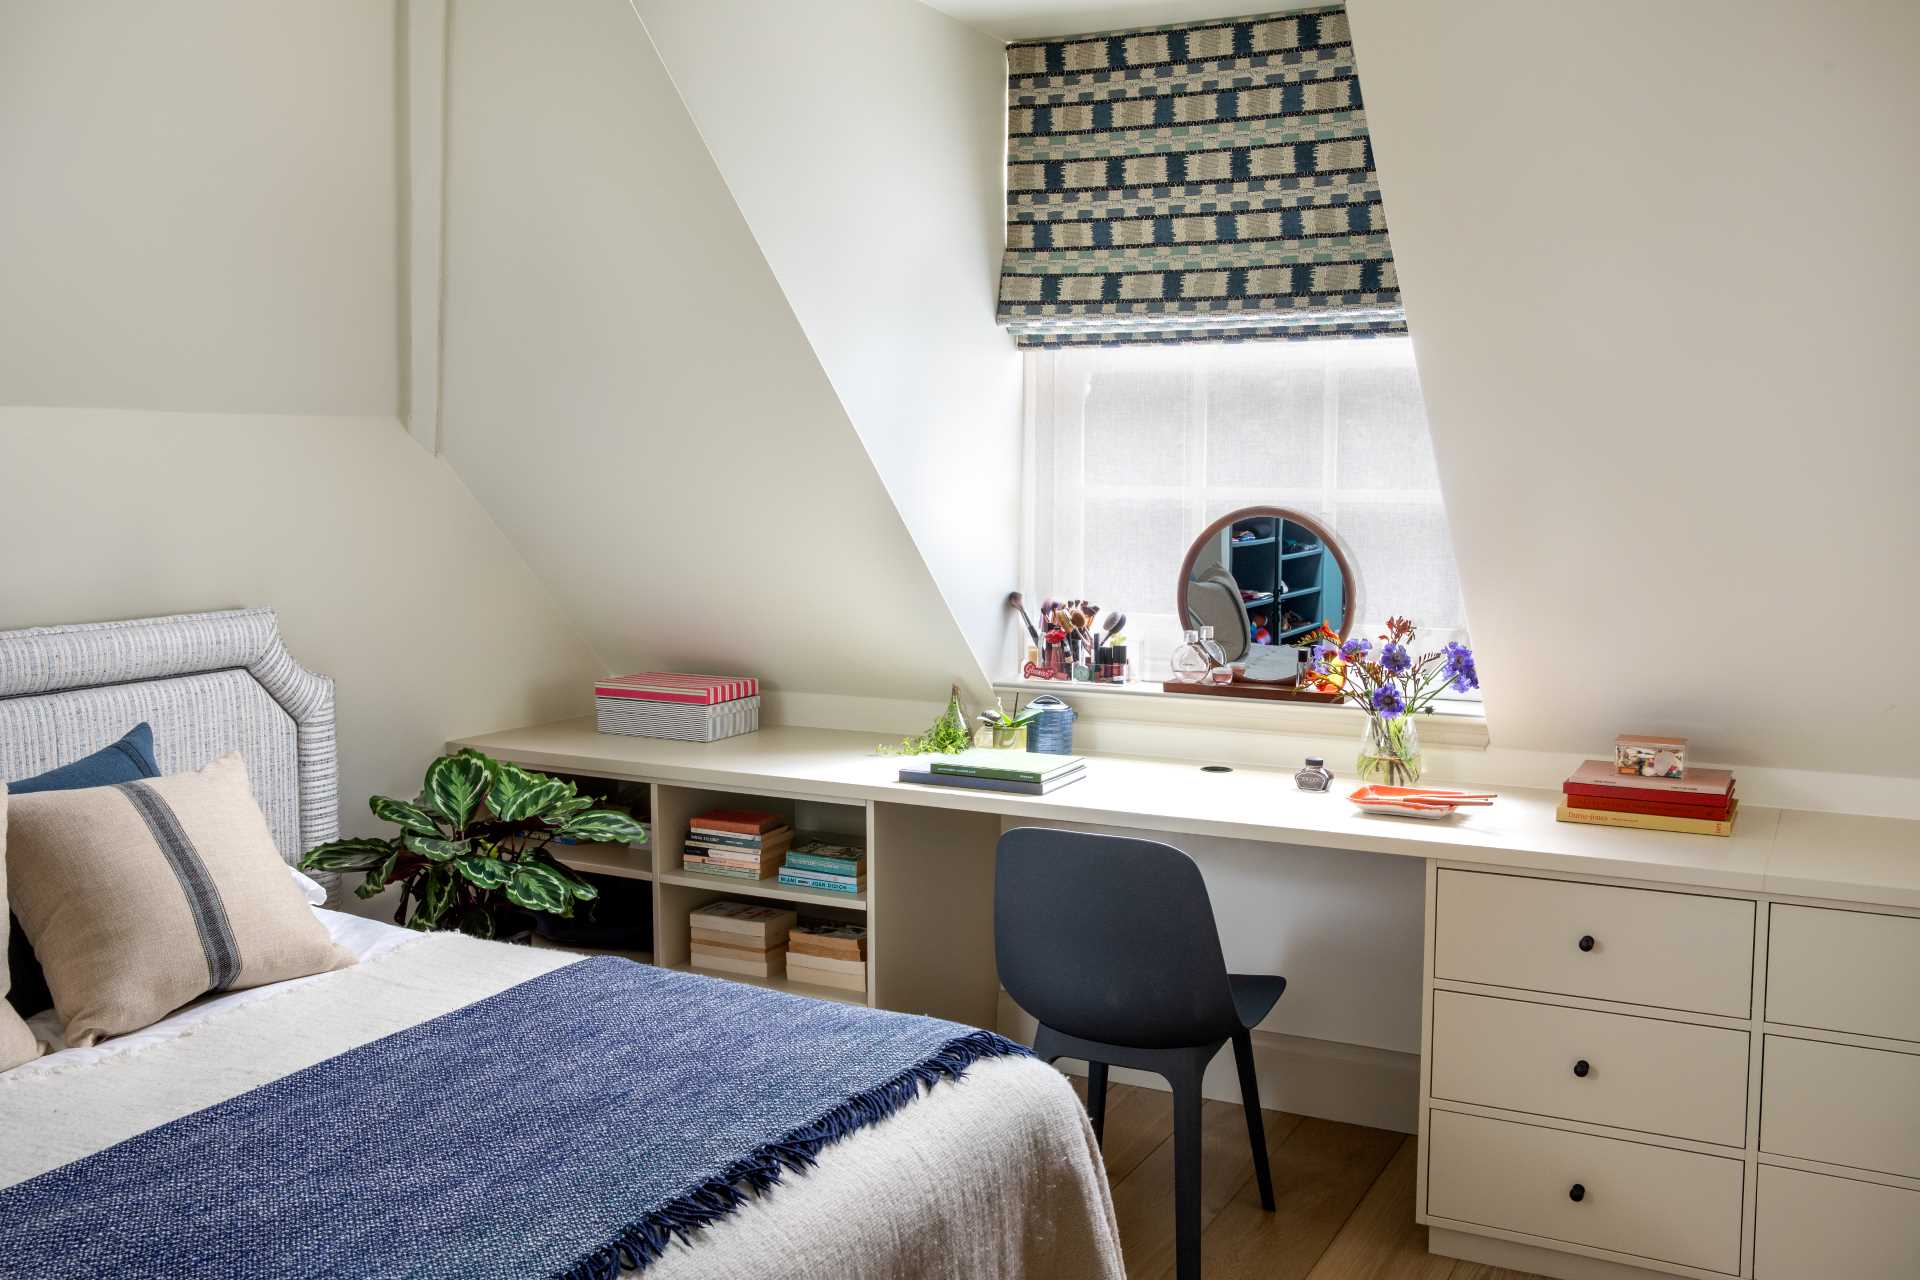 In this bedroom, there's a built-in desk by the window that incorporates drawers and open shelves.